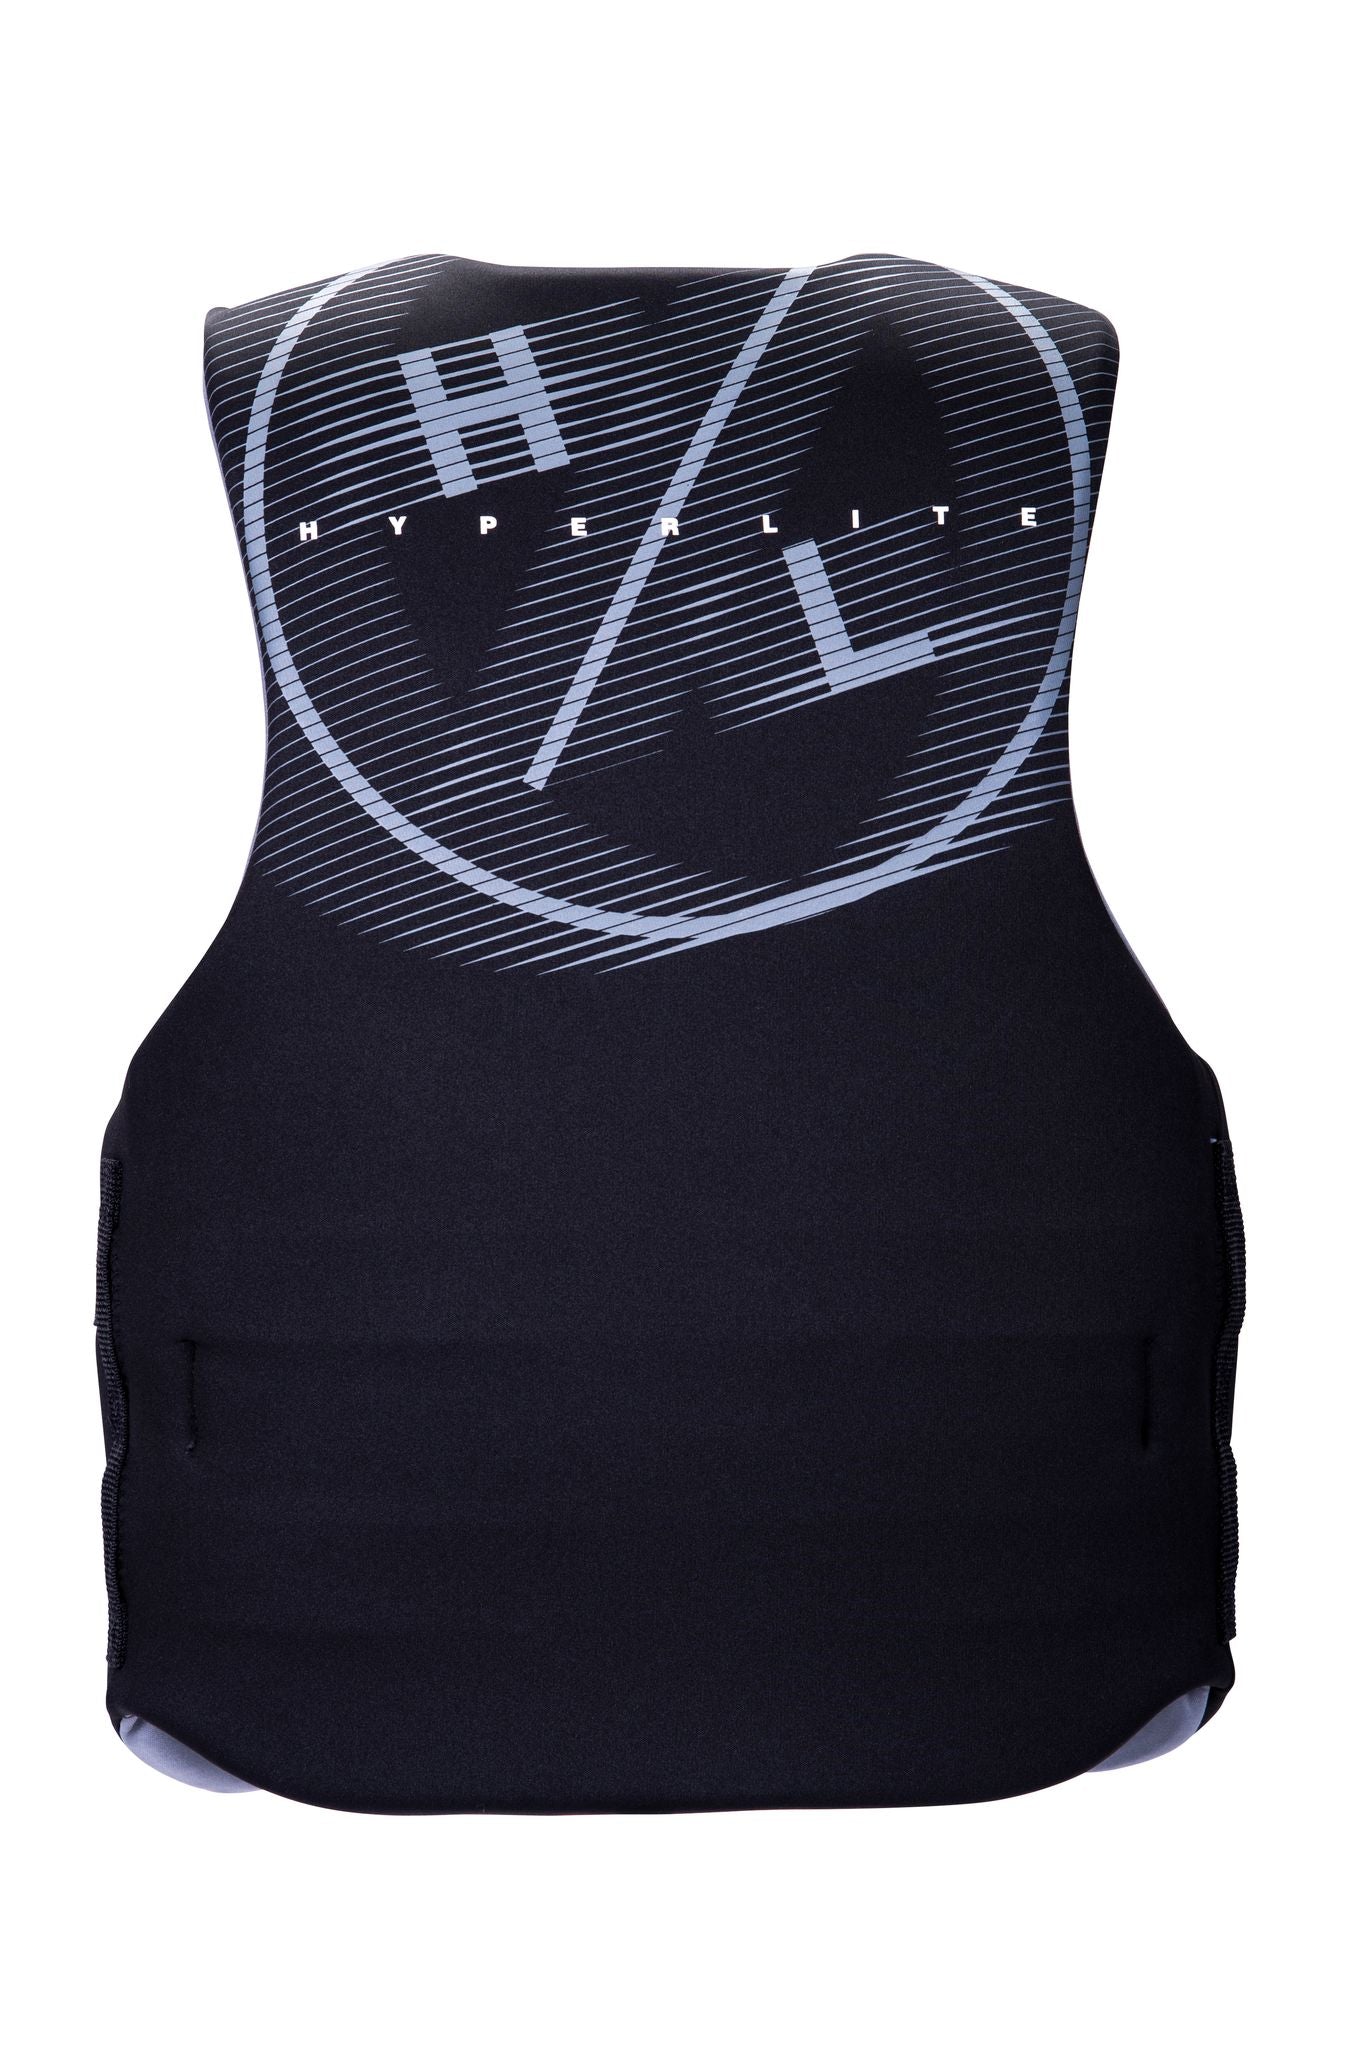 A black Hyperlite Men's Indy CGA Vest with a grey Hyperlite logo on it, approved by Transport Canada for use as a life-saving device.